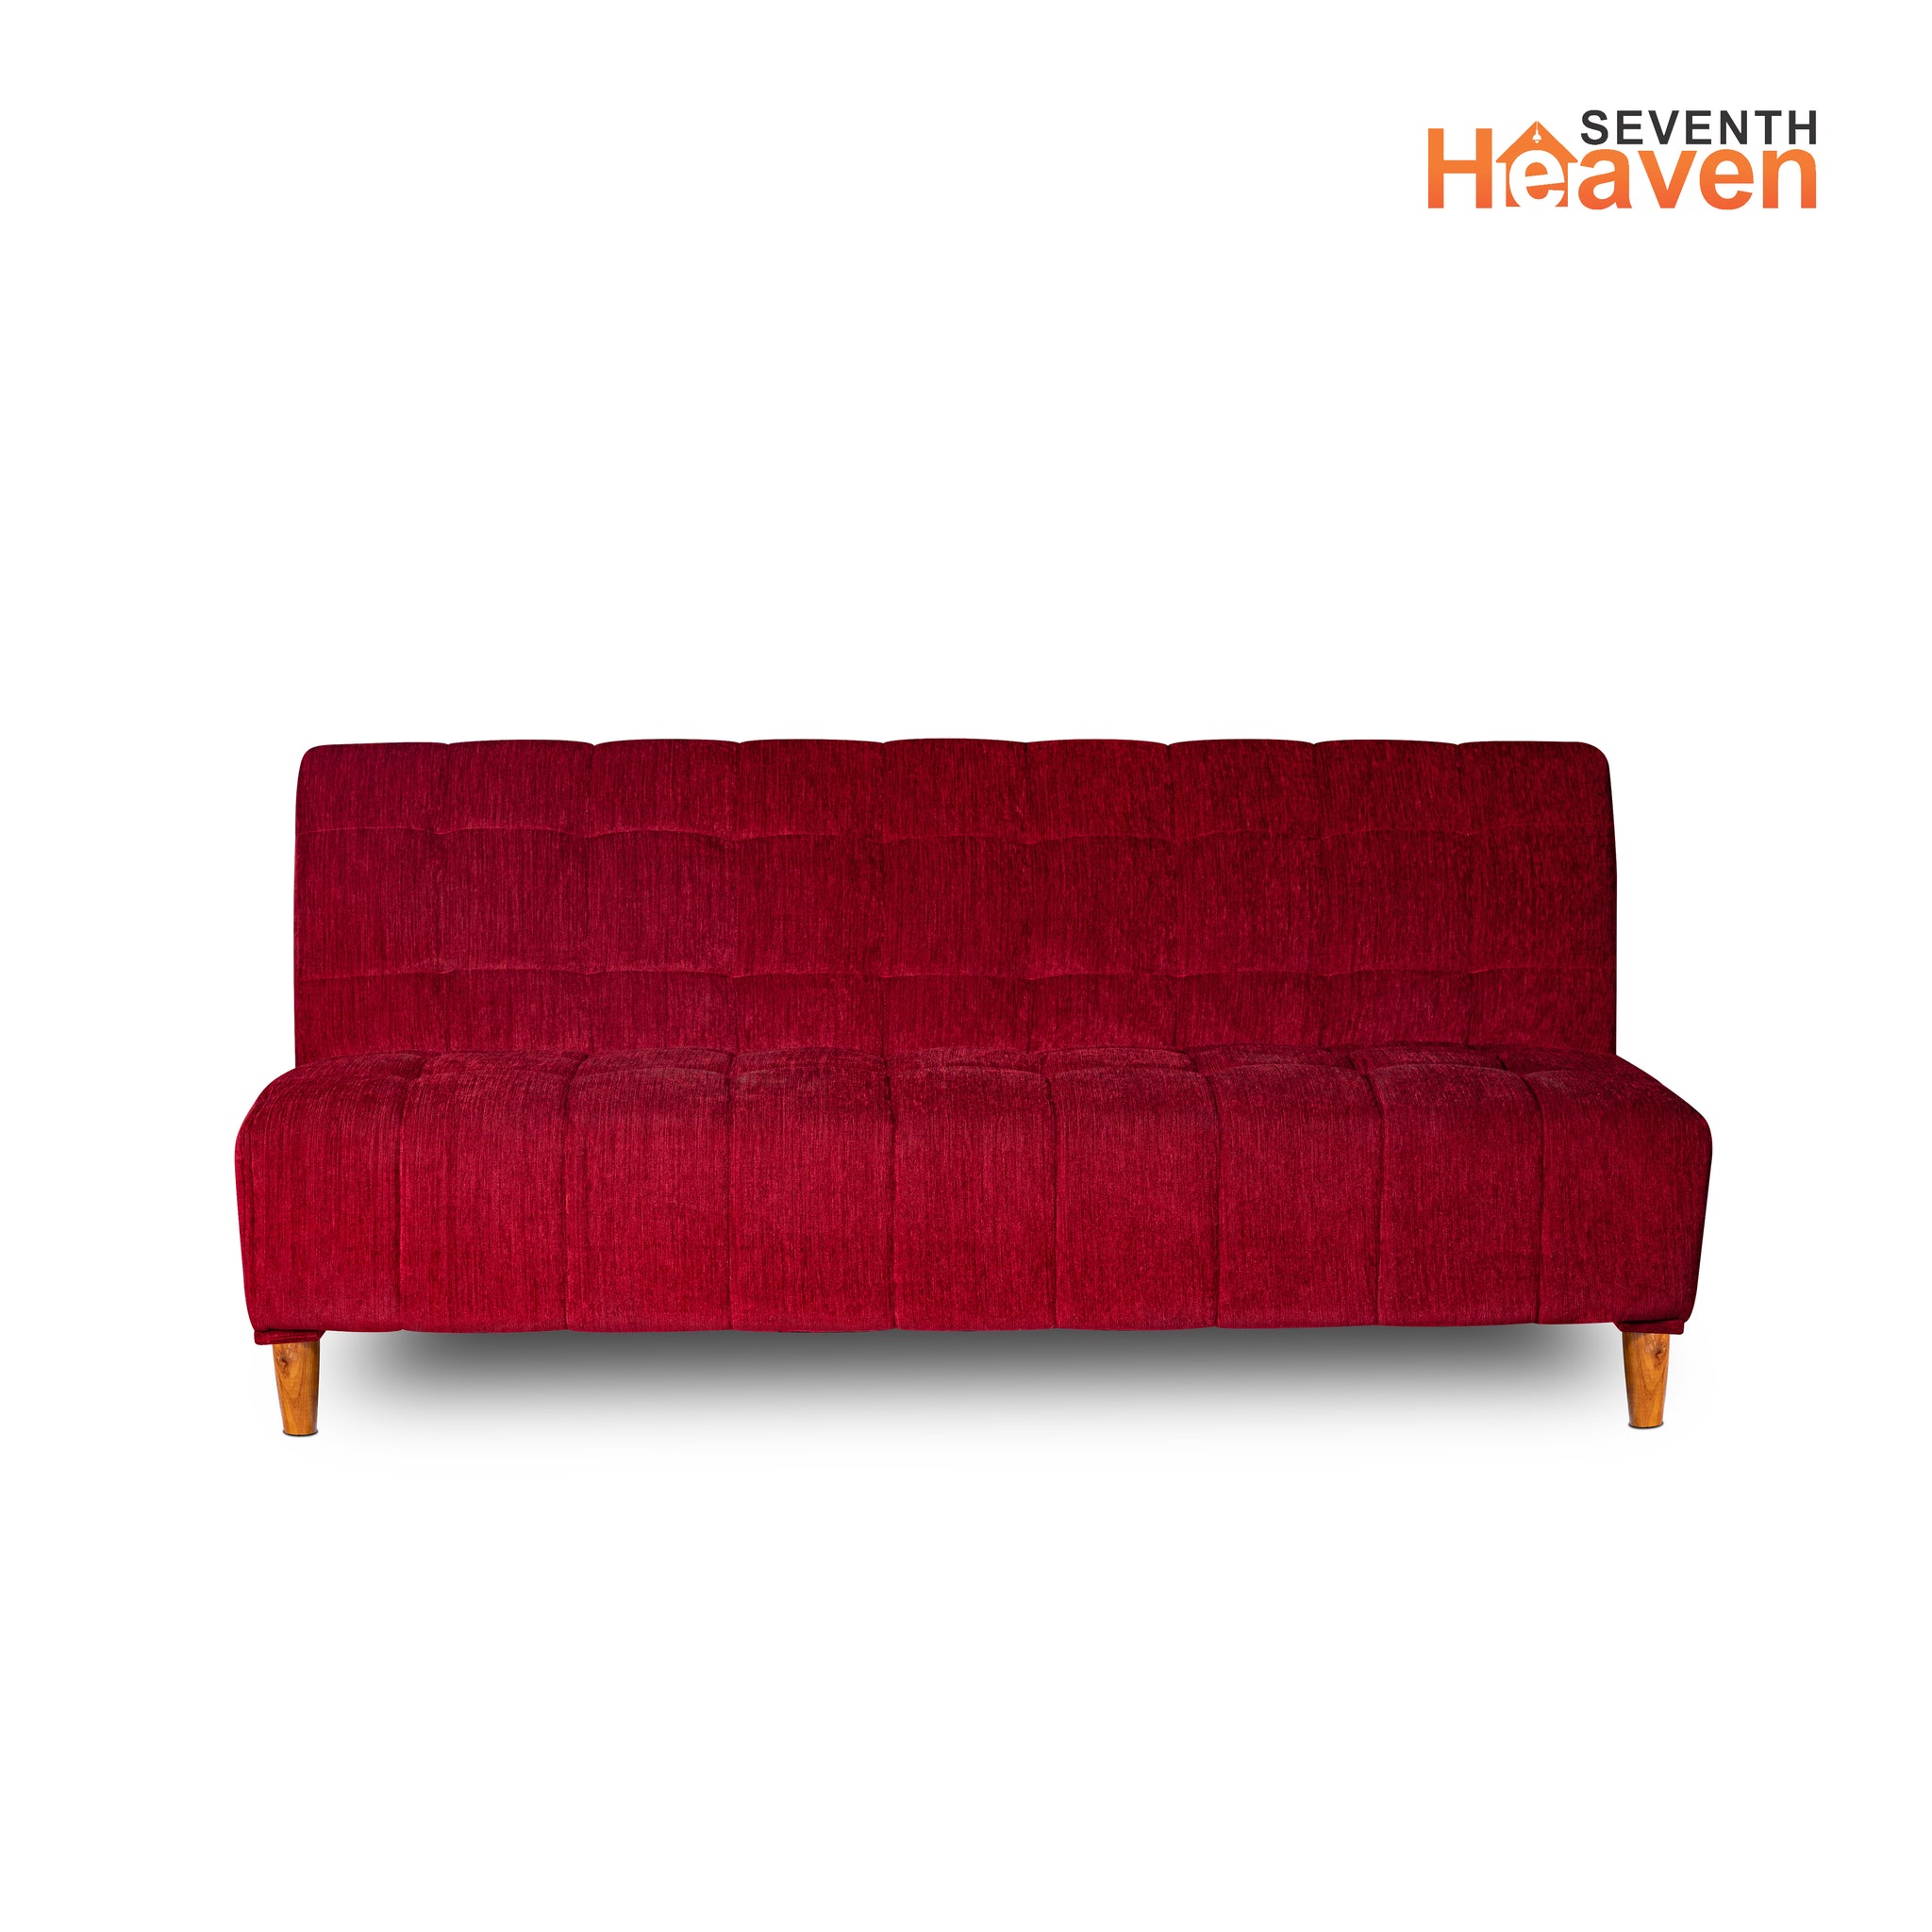 Seventh Heaven Florida 4 Seater Wooden Sofa Cum Bed. Modern & Elegant Smart Furniture Range for luxurious homes, living rooms and offices. Use as a sofa, lounger or bed. Perfect for guests. Molphino fabric with sheesham polished wooden legs. Maroon colour.